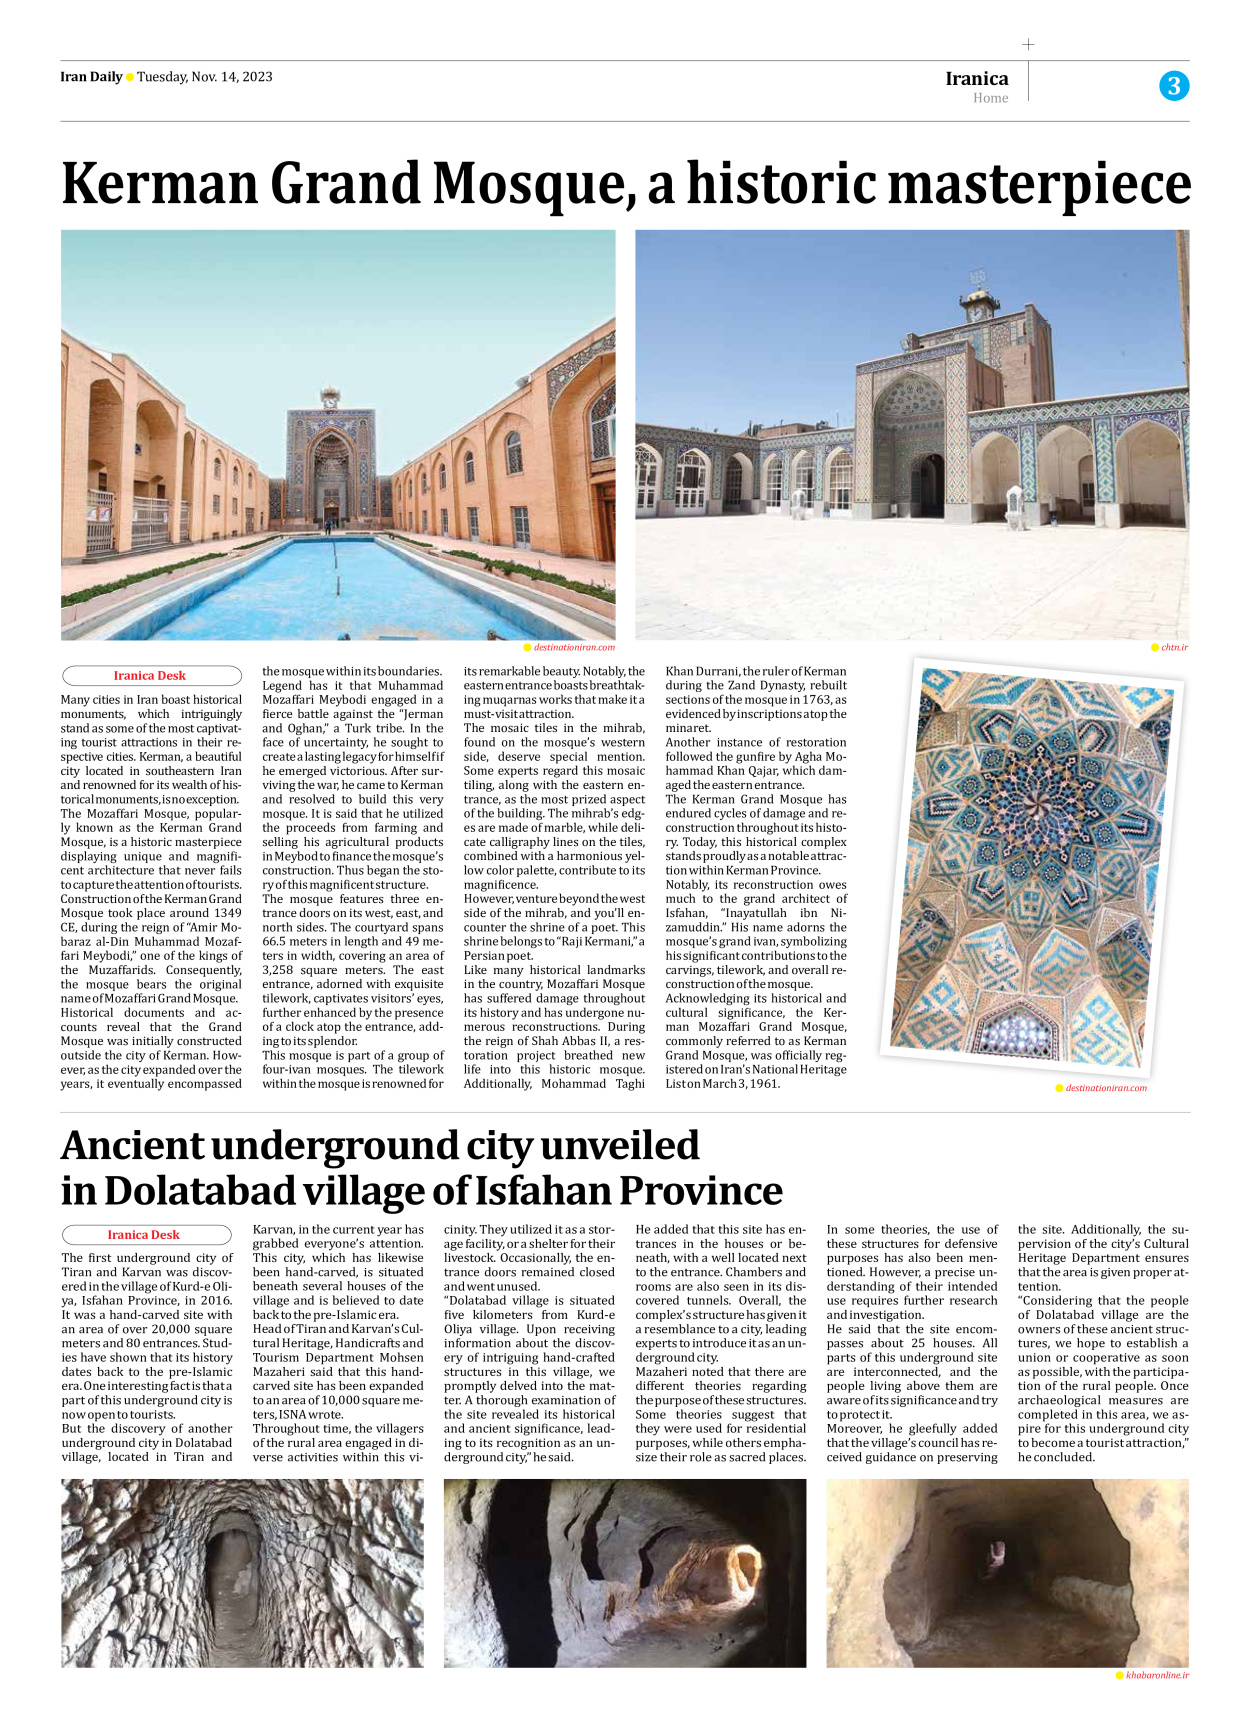 Iran Daily - Number Seven Thousand Four Hundred and Thirty Four - 14 November 2023 - Page 3